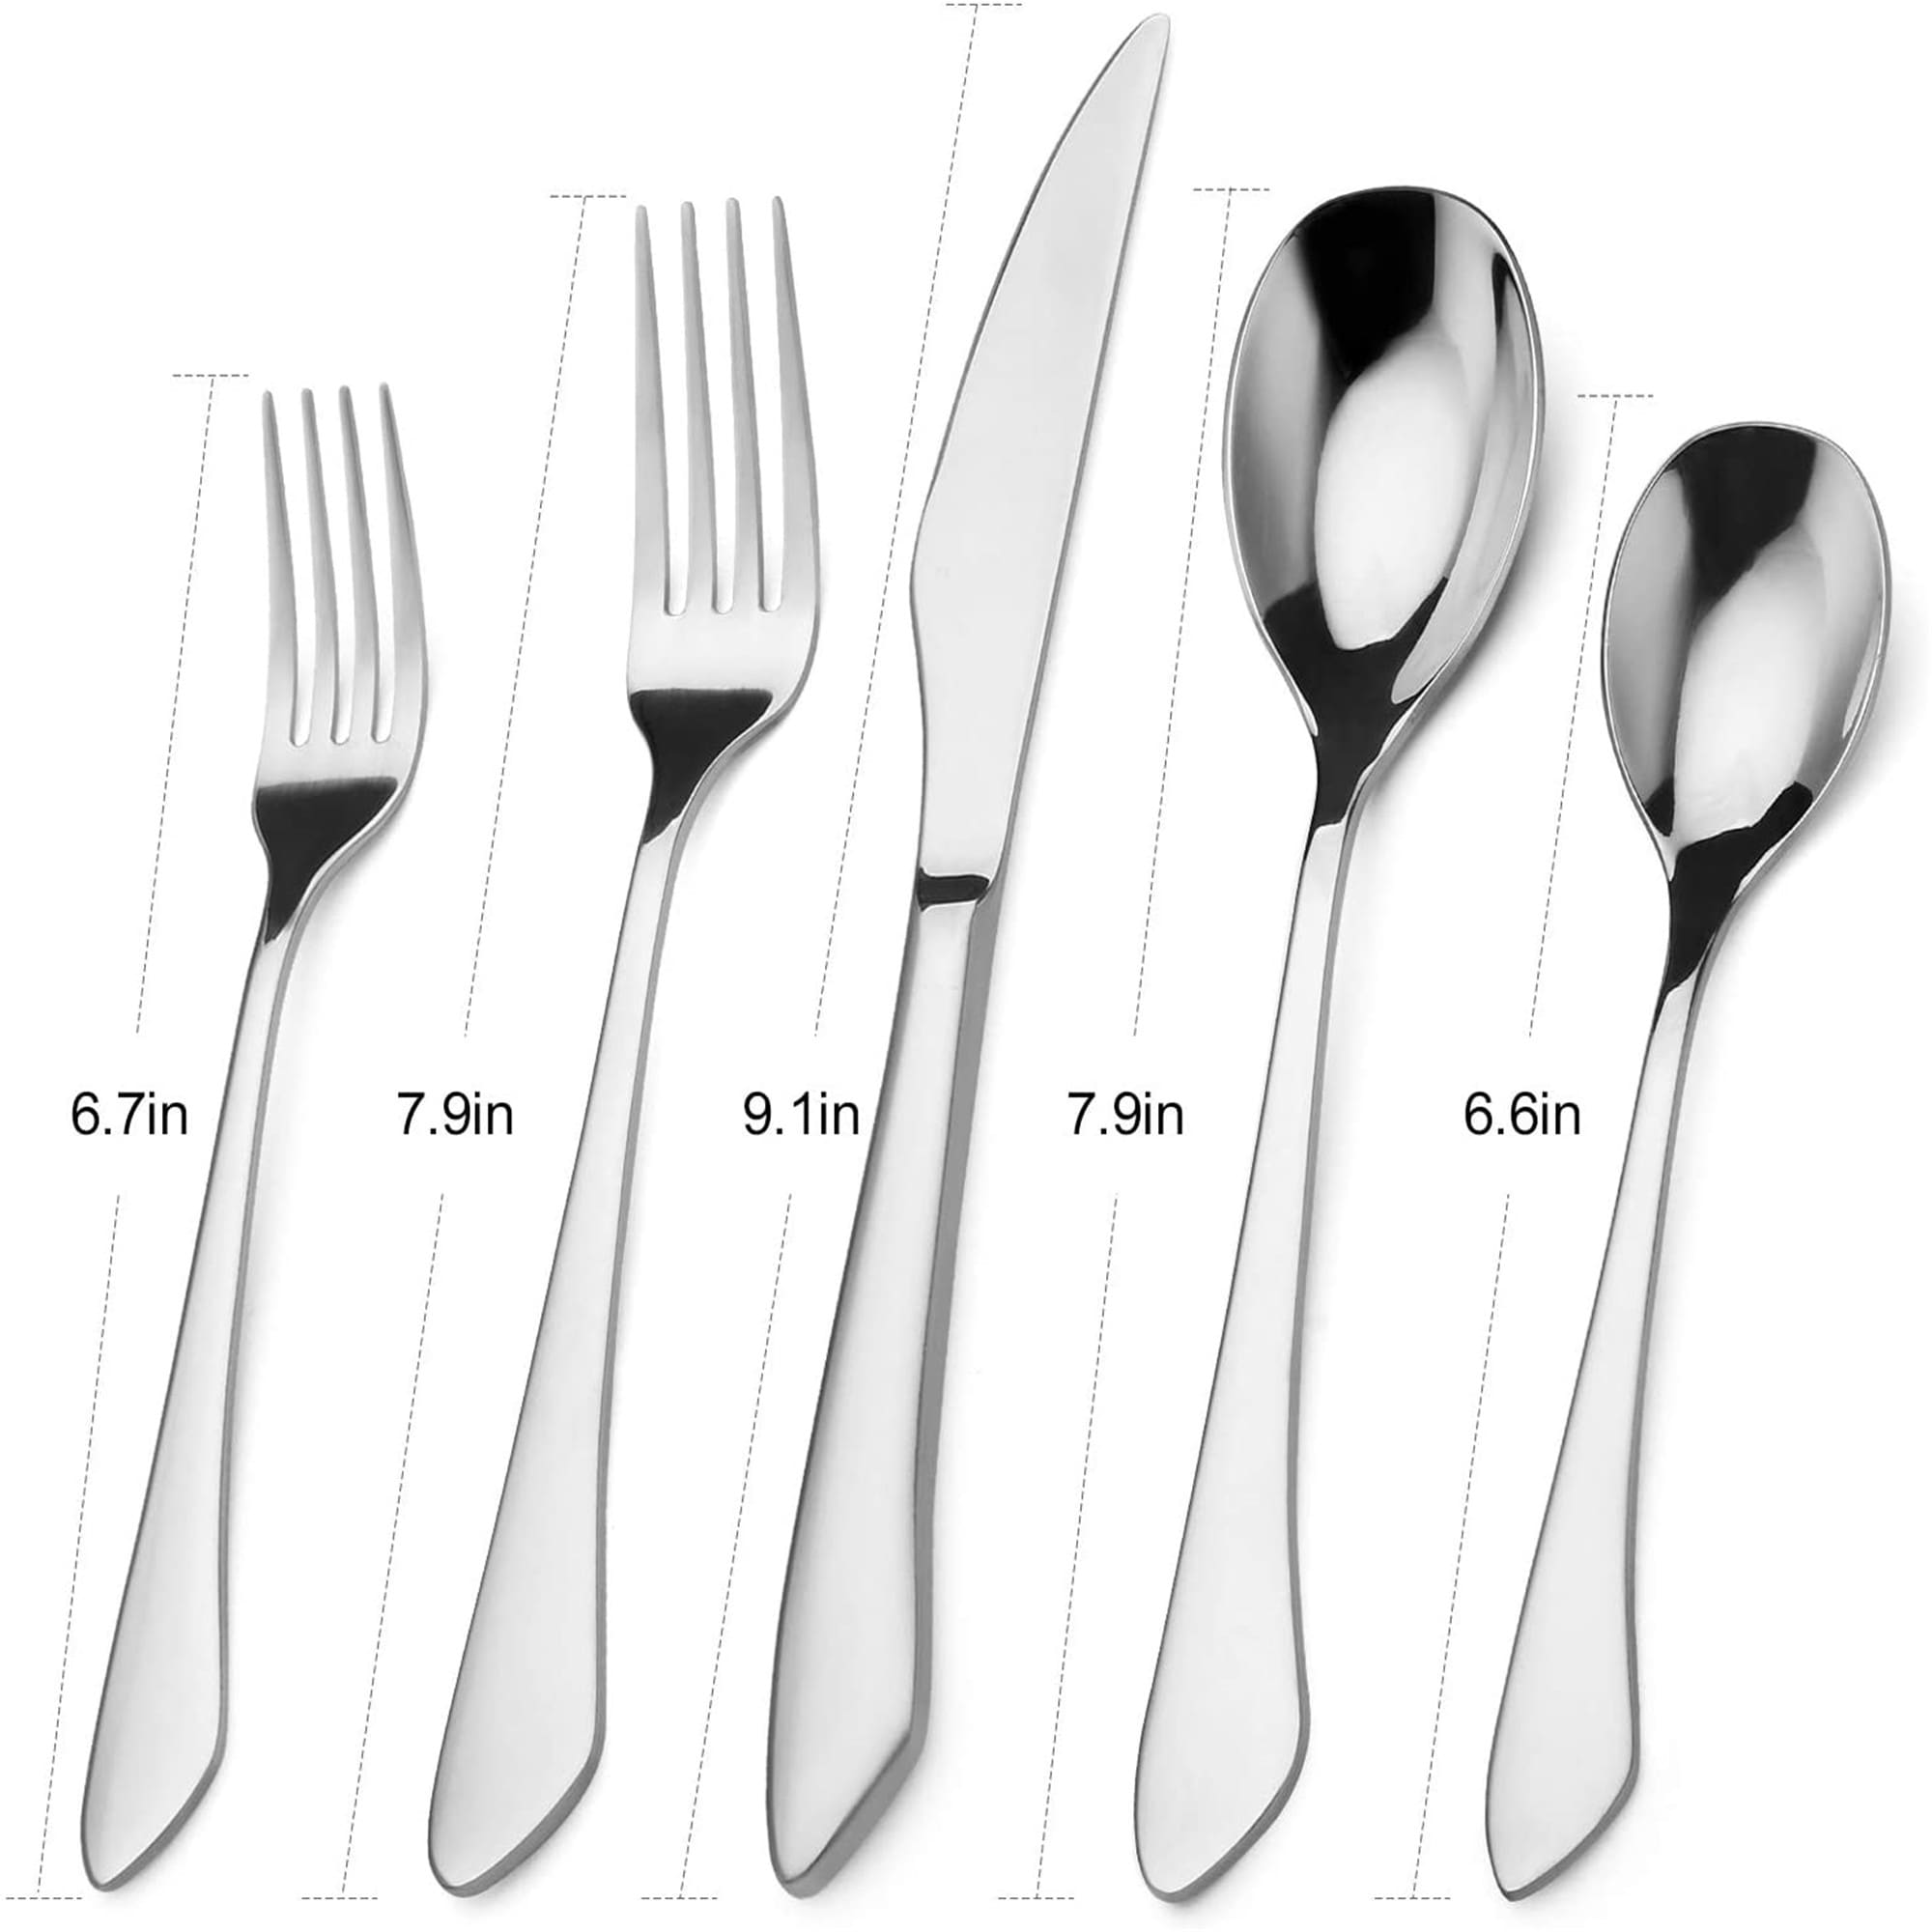 https://ak1.ostkcdn.com/images/products/is/images/direct/5436f24ebdfd34a9e4d31c06c36fd4fb63b7429e/Silverware-Set%2C-20-Piece-Stainless-Steel-Flatware-Set-Service-for-4%2C-Satin-Finish-Tableware-Cutlery-Set-Dishwasher-Safe.jpg